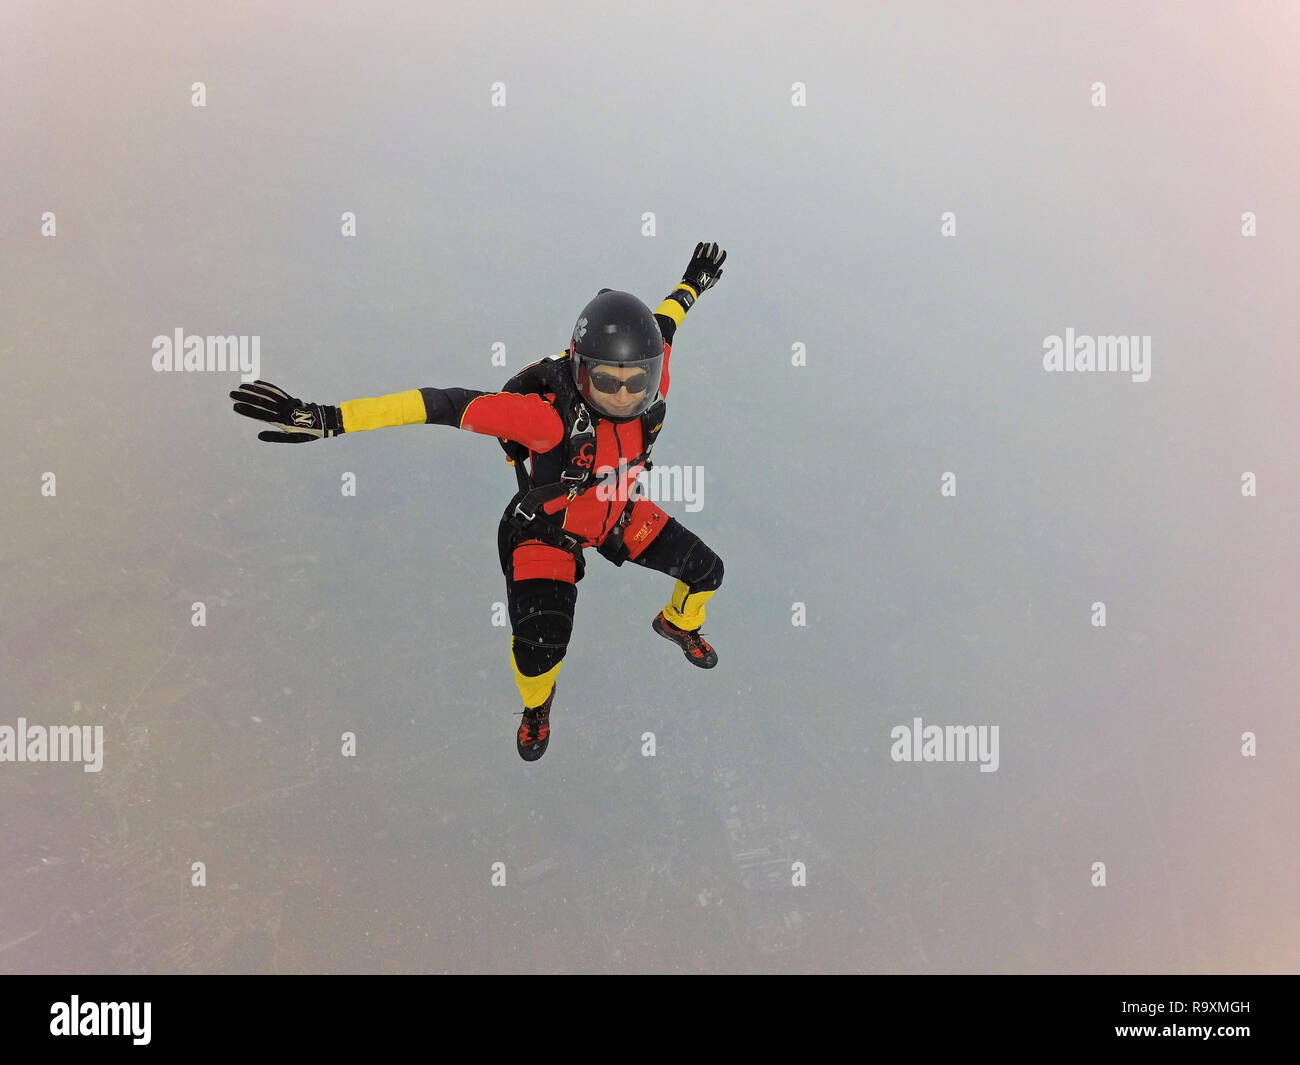 This freefly skydiver is practising some new dive positions in the sky. Thereby the free fall speed is up to 150mph and the jumper has much fun! Stock Photo